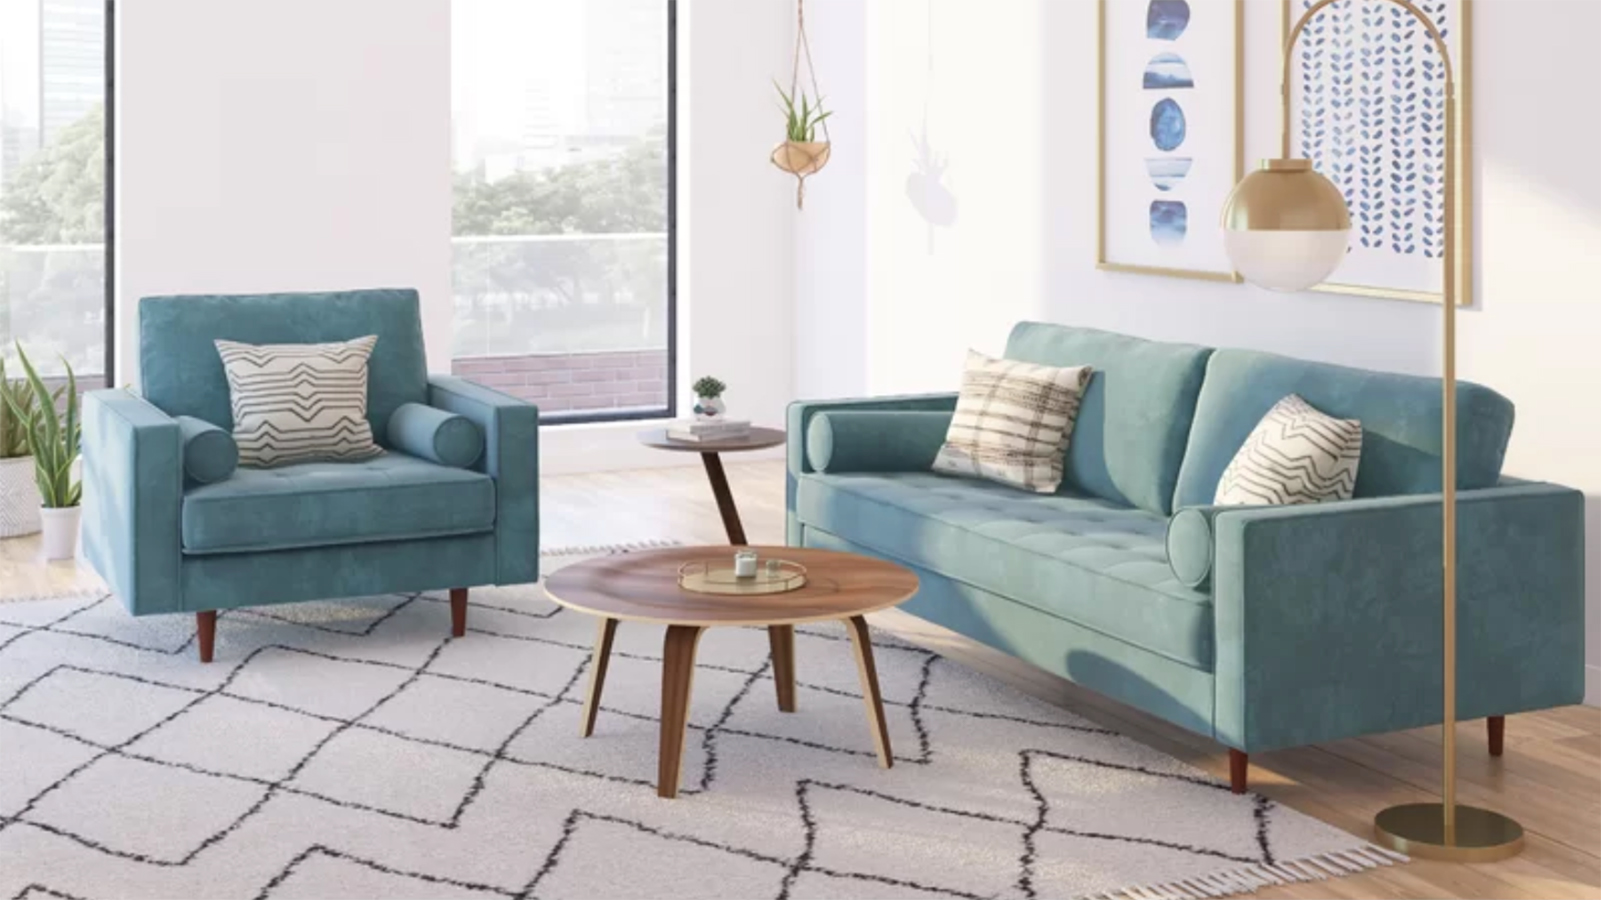 You don’t have to spend thousands for a quality couch: Here are 15 from Wayfair shoppers love | CNN Underscored